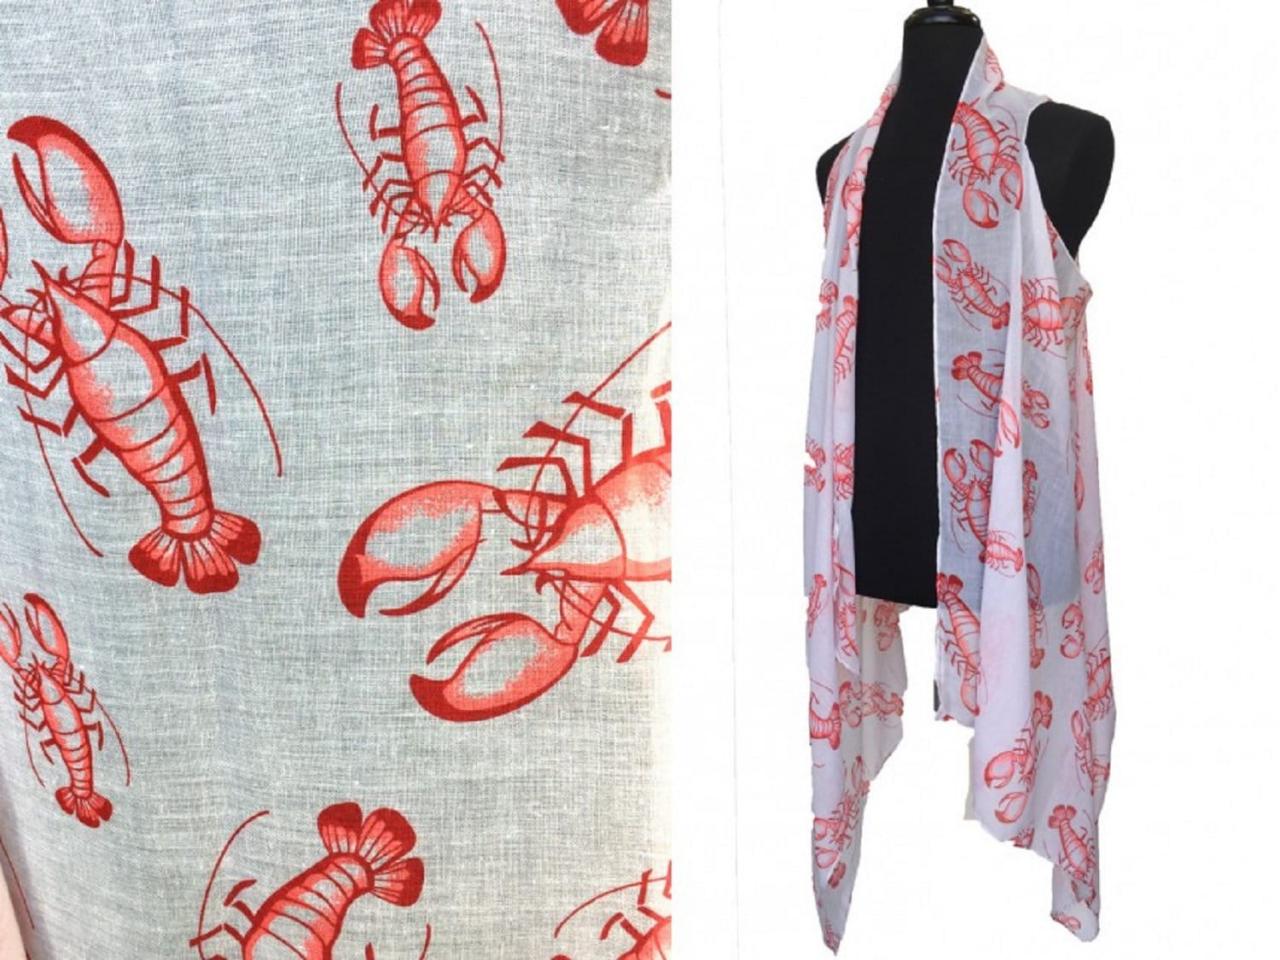 Crawfish Lobster Sleeveless Cardigan, Poncho, Clothing, Top, Swimsuit Orleans Cajun Creole Boil